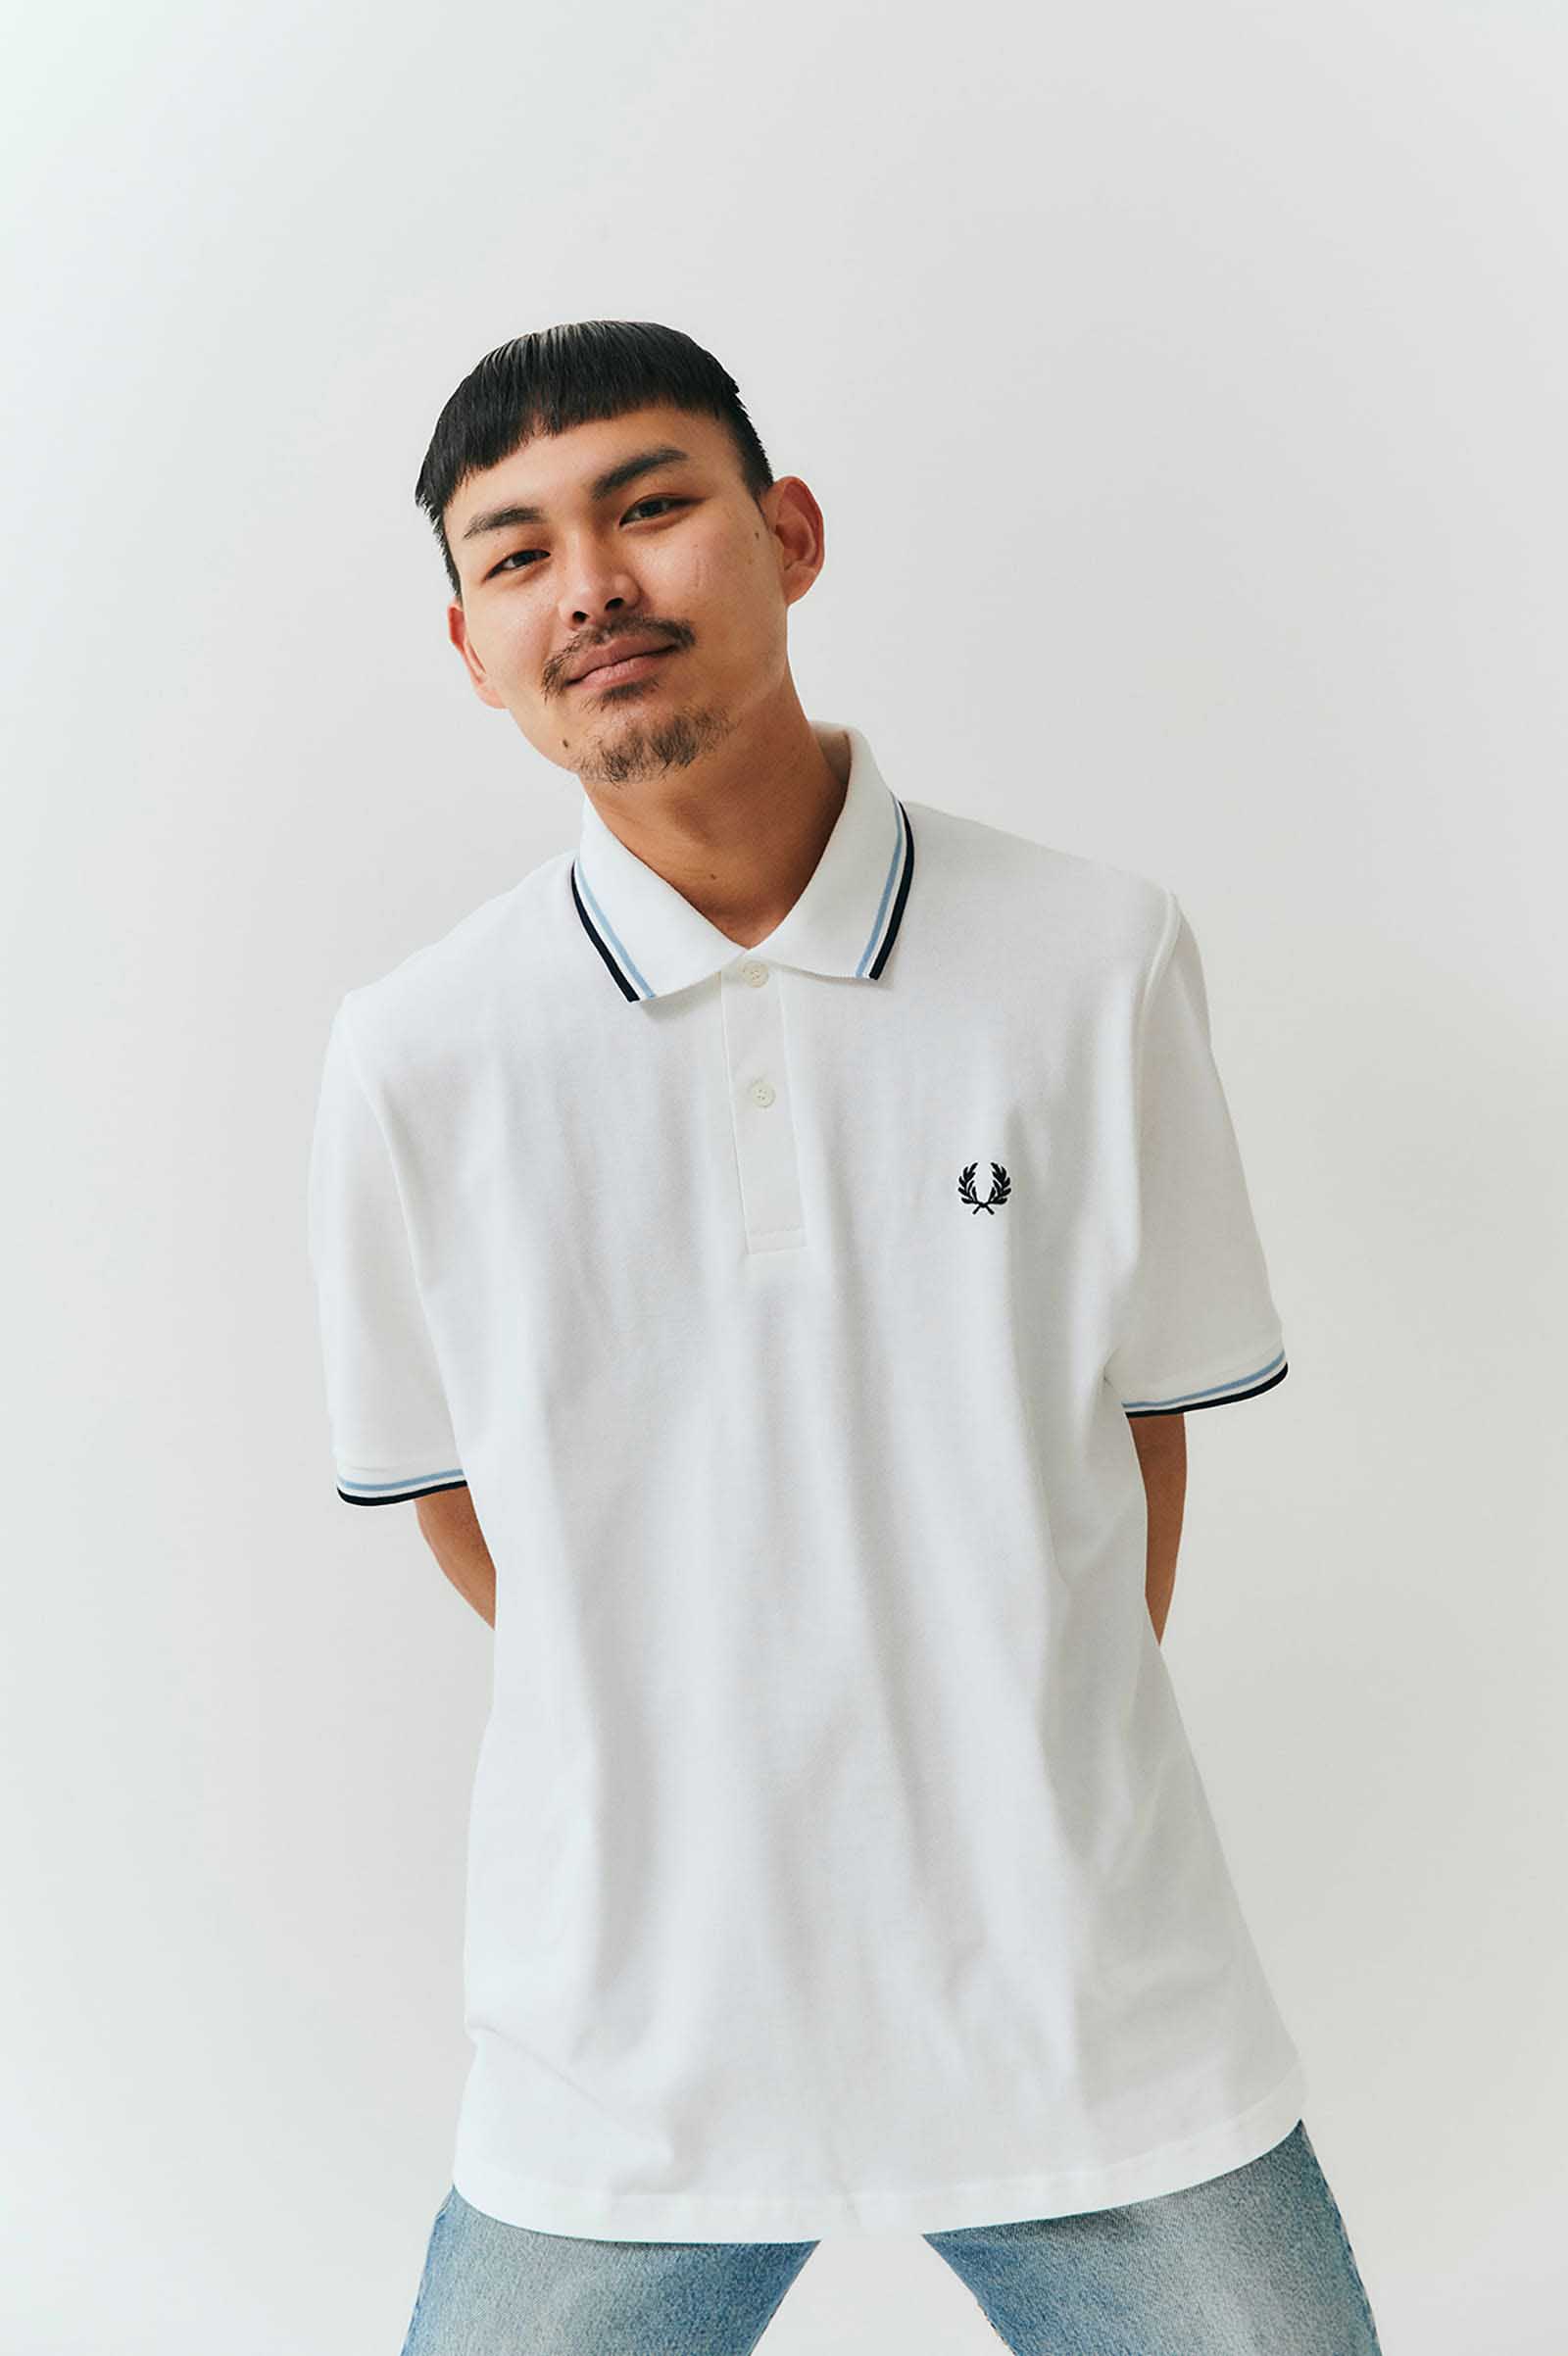 The Fred Perry Shirt - M12 |FRED PERRY(フレッドペリー)の通販 